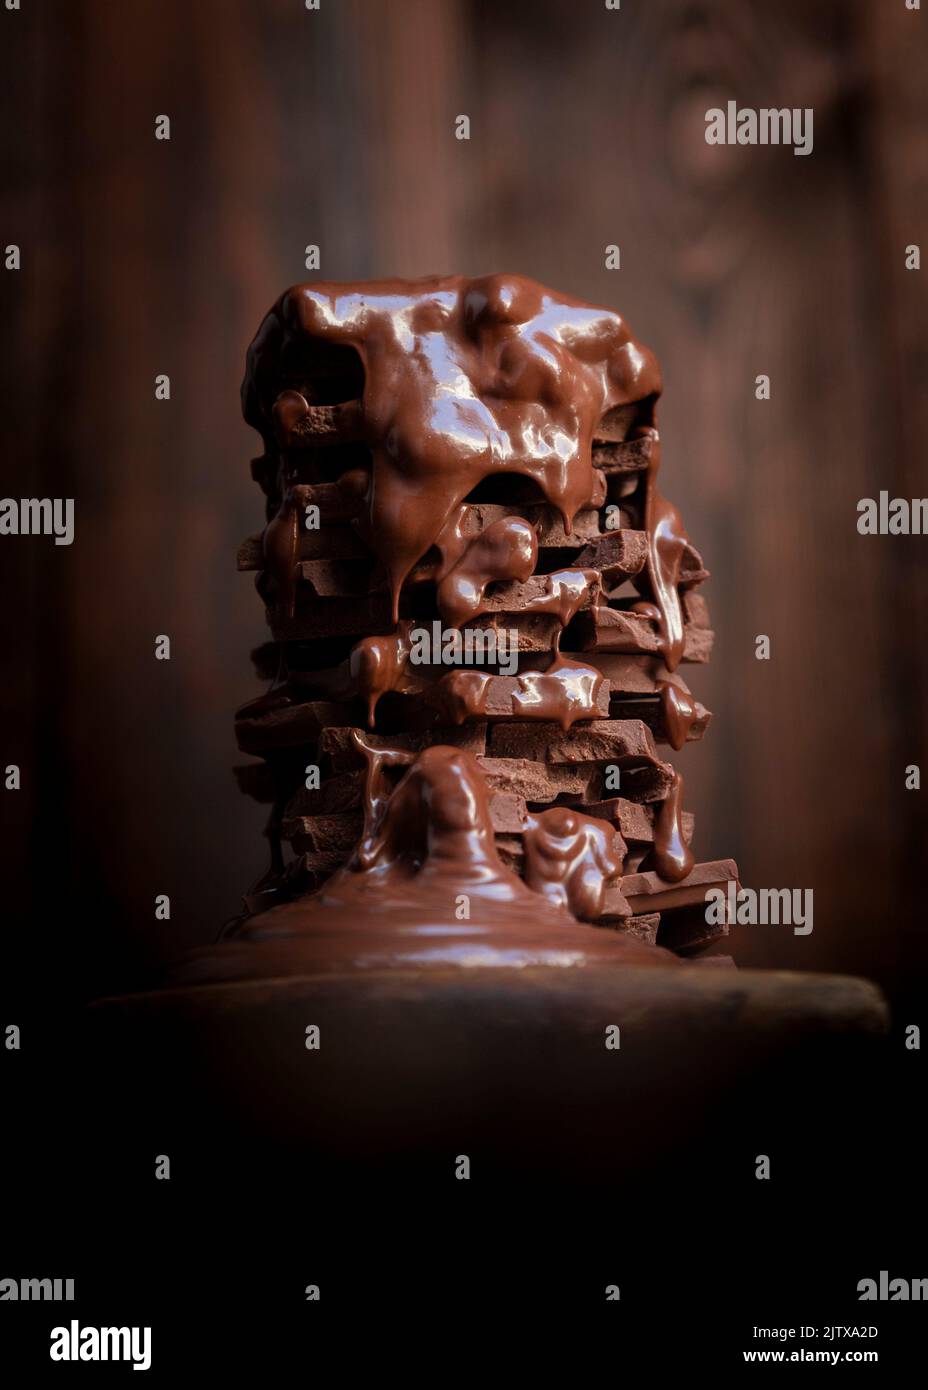 Melted hot chocolate dripping over a pile of chocolate bars on a rustic wooden table. Stock Photo